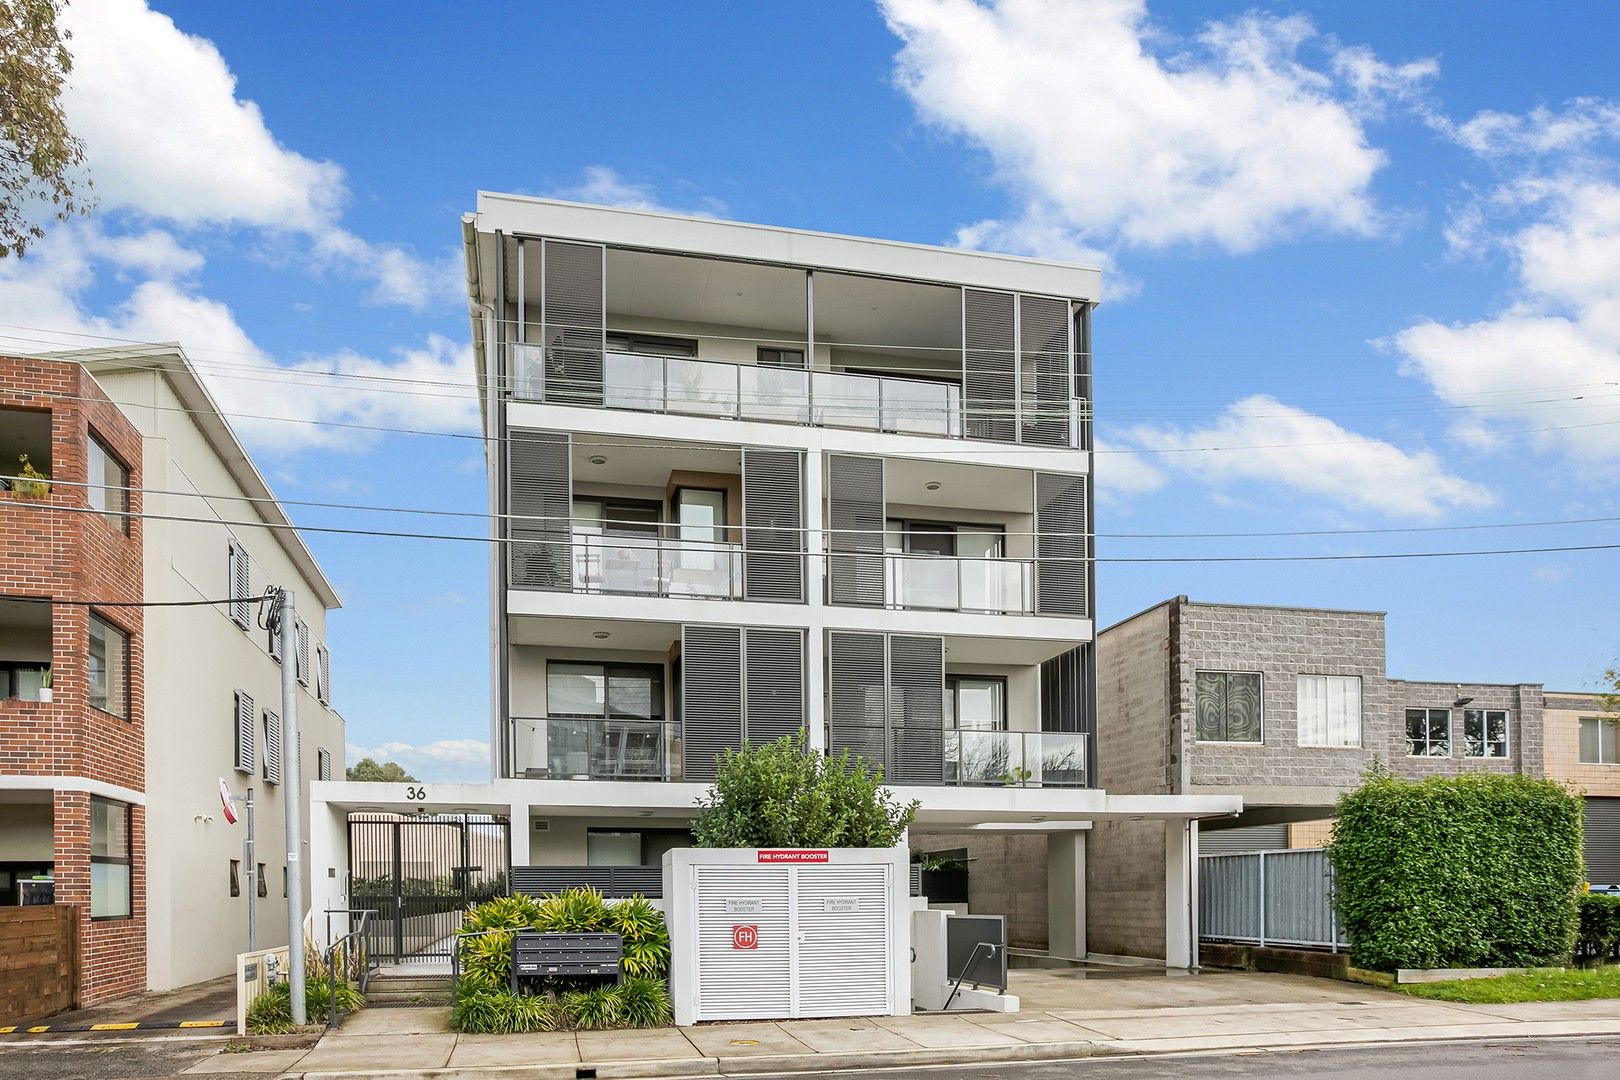 1 bedrooms Apartment / Unit / Flat in 2/36 Tennyson Road MORTLAKE NSW, 2137